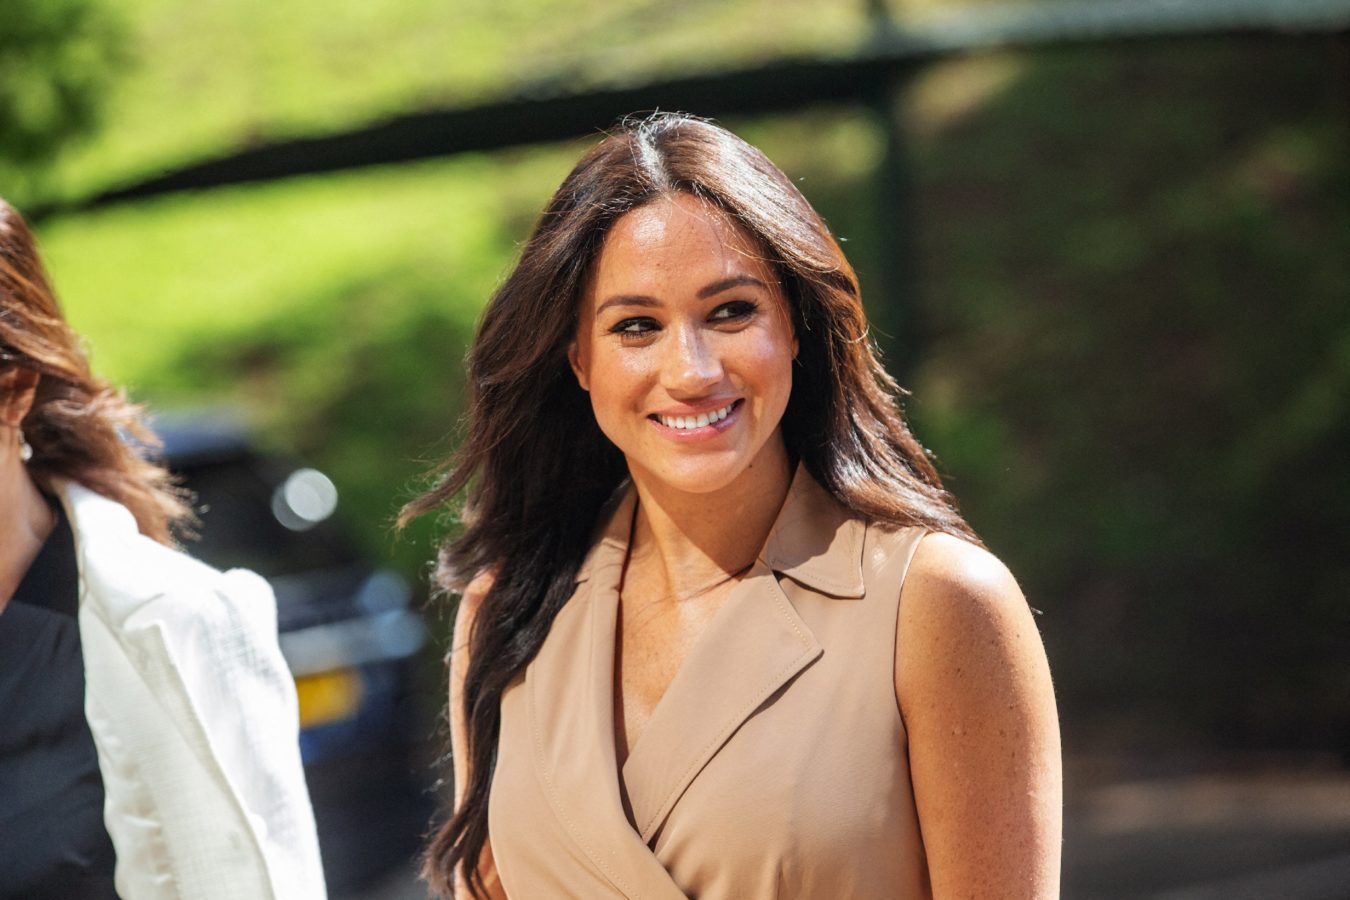 Meghan Markle is working on an animated adventure series for Netflix